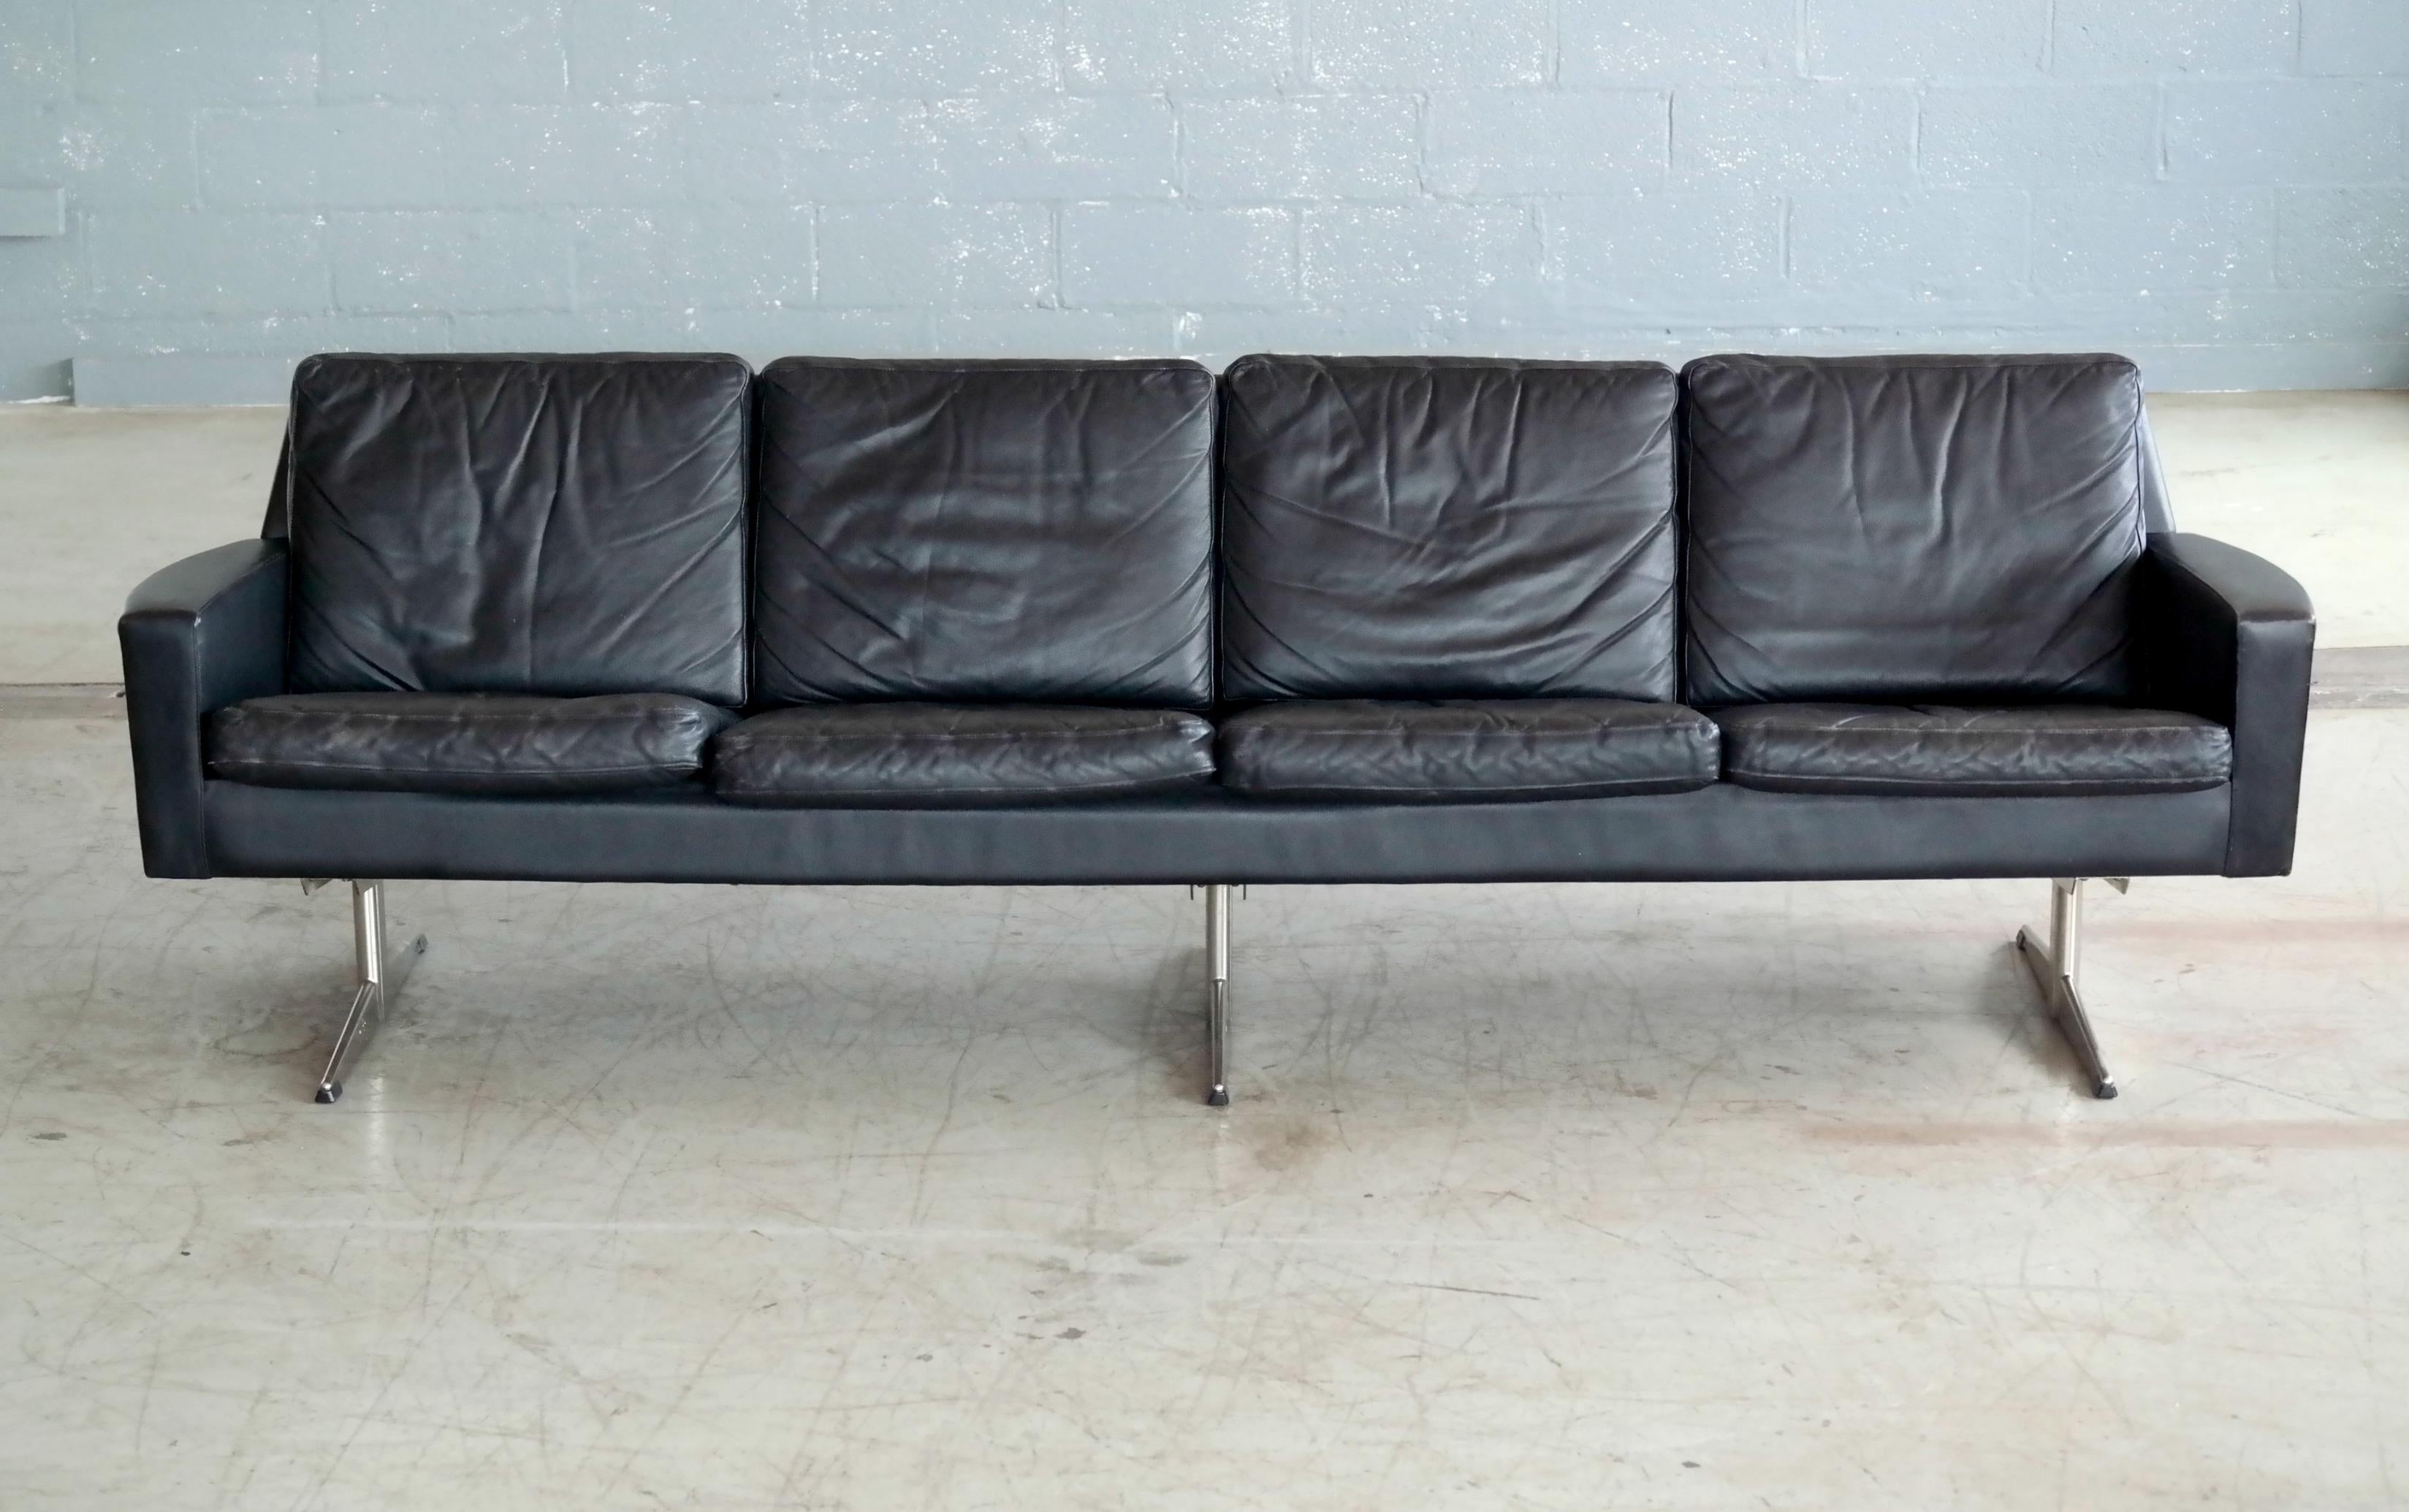 Great Danish 1960s four-seat airport sofa in black leather on steel legs. With clear design parallels to Arne Jacobsen and Hans Wegner's famous airport sofas the piece appears to be the work of Designer Georg Thams and Vejen Polstermobelfabrik,